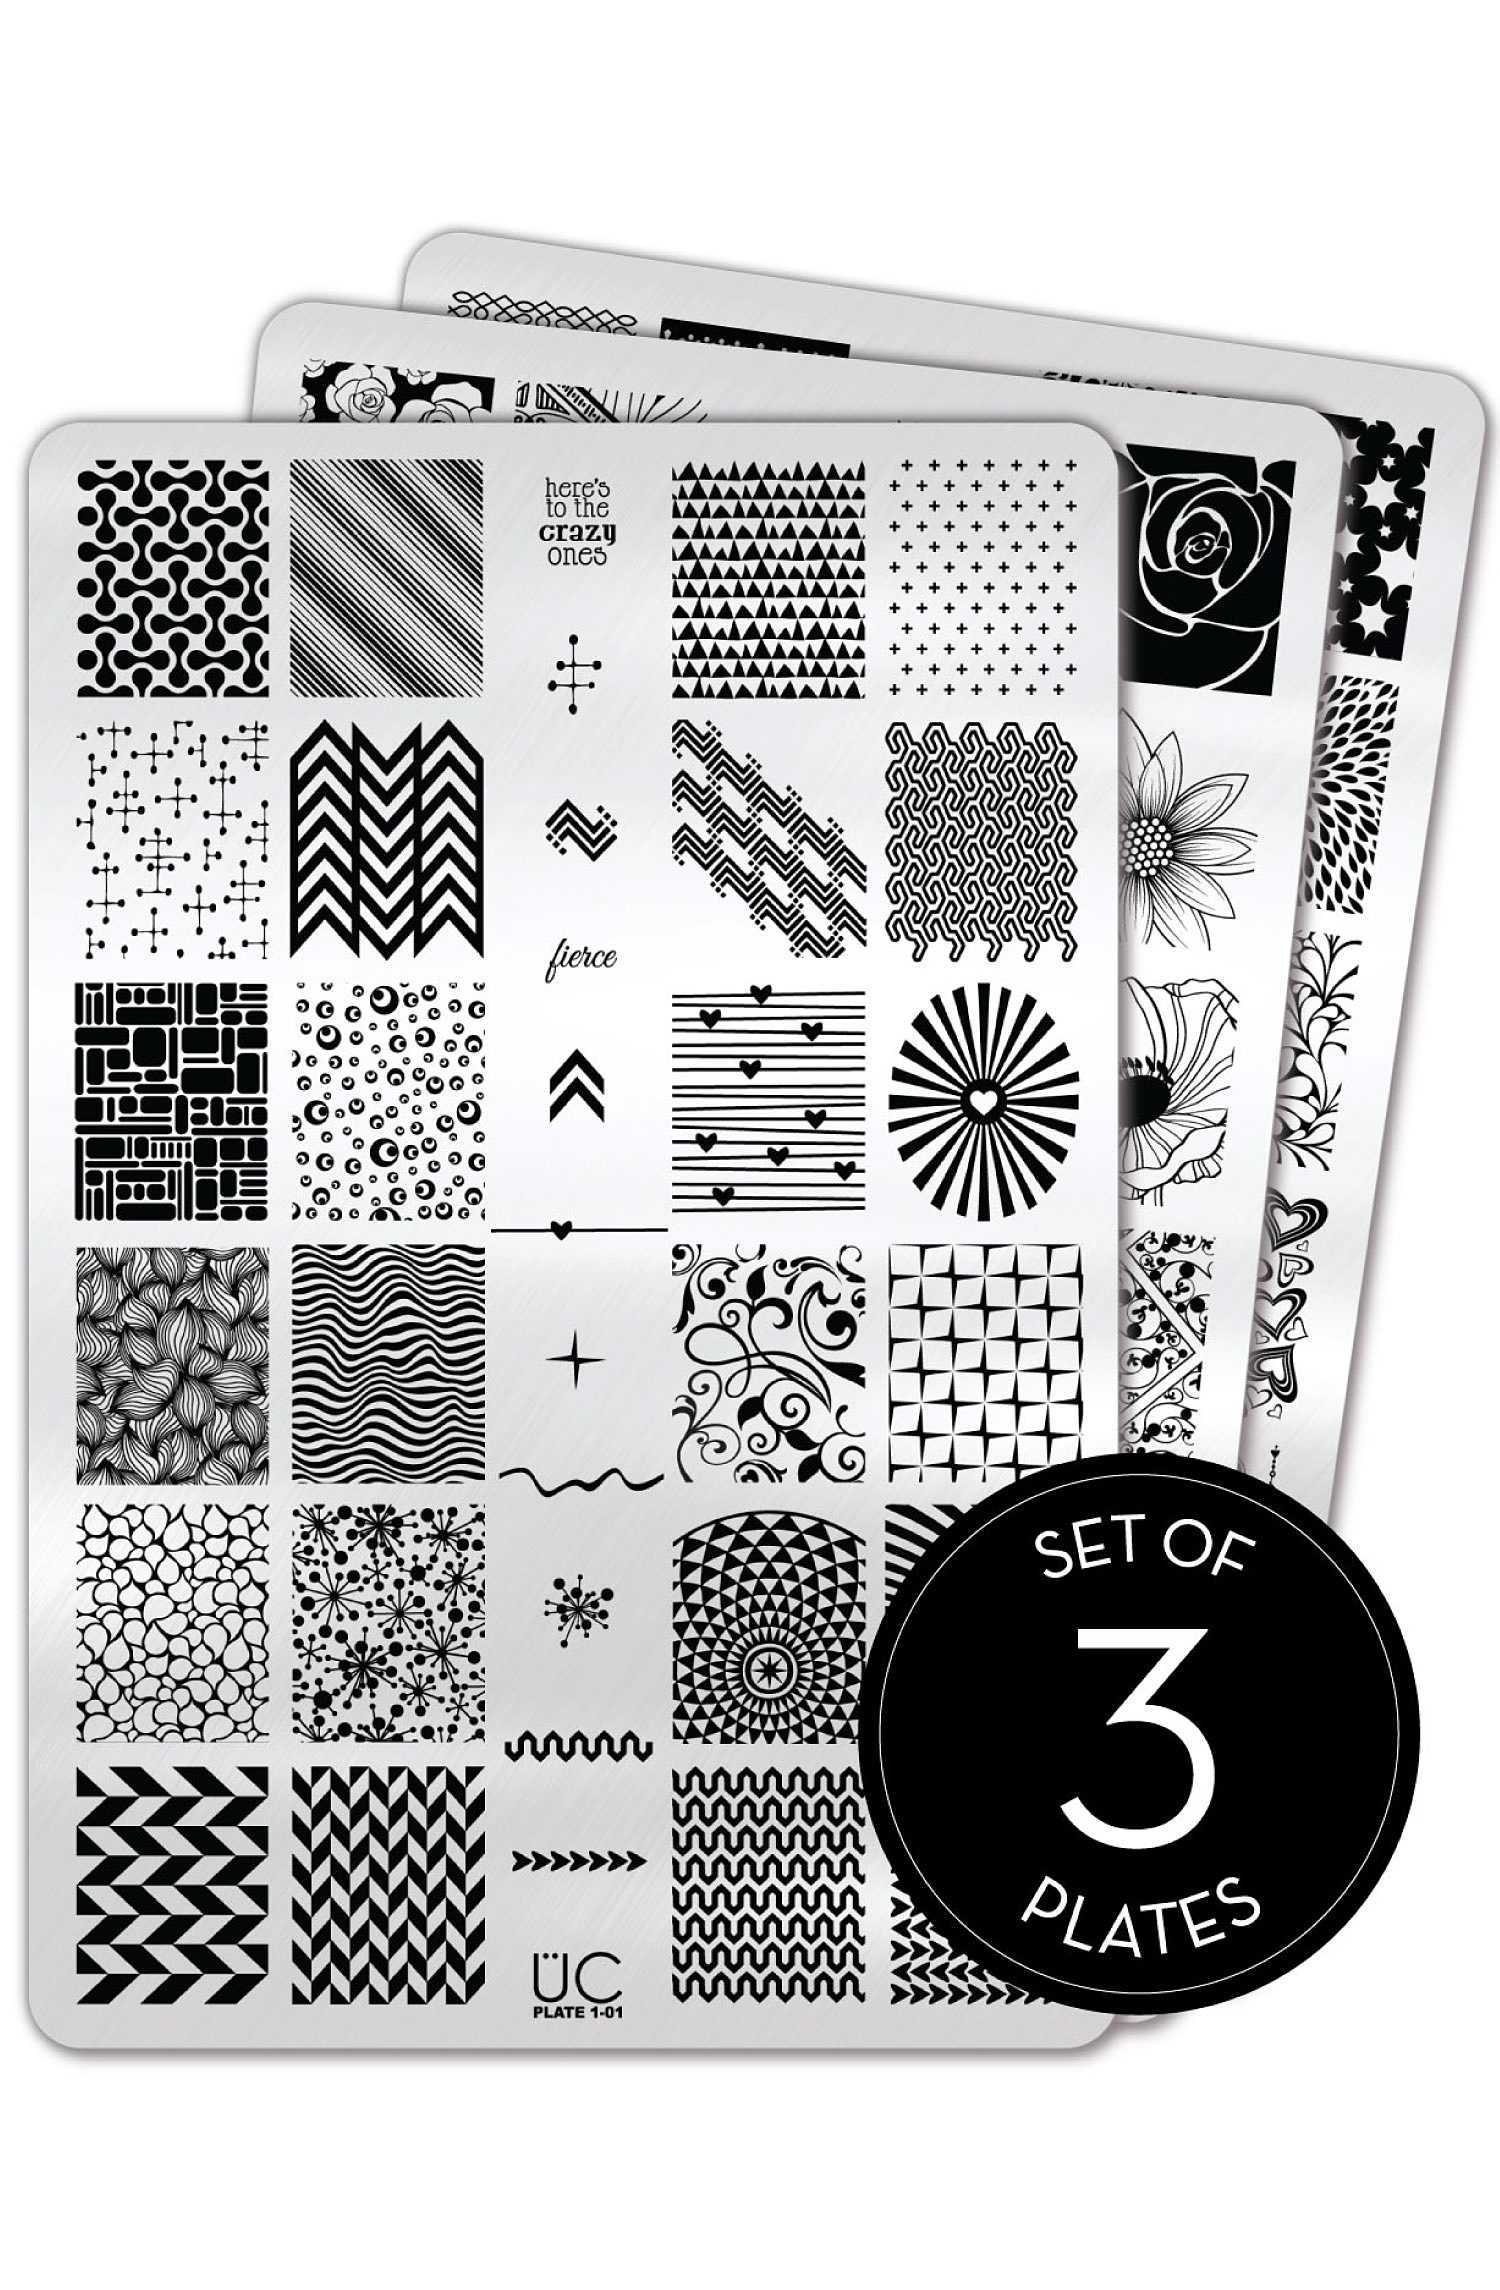 Uber Chic Stamping Plates for Nail Art - Collection 20